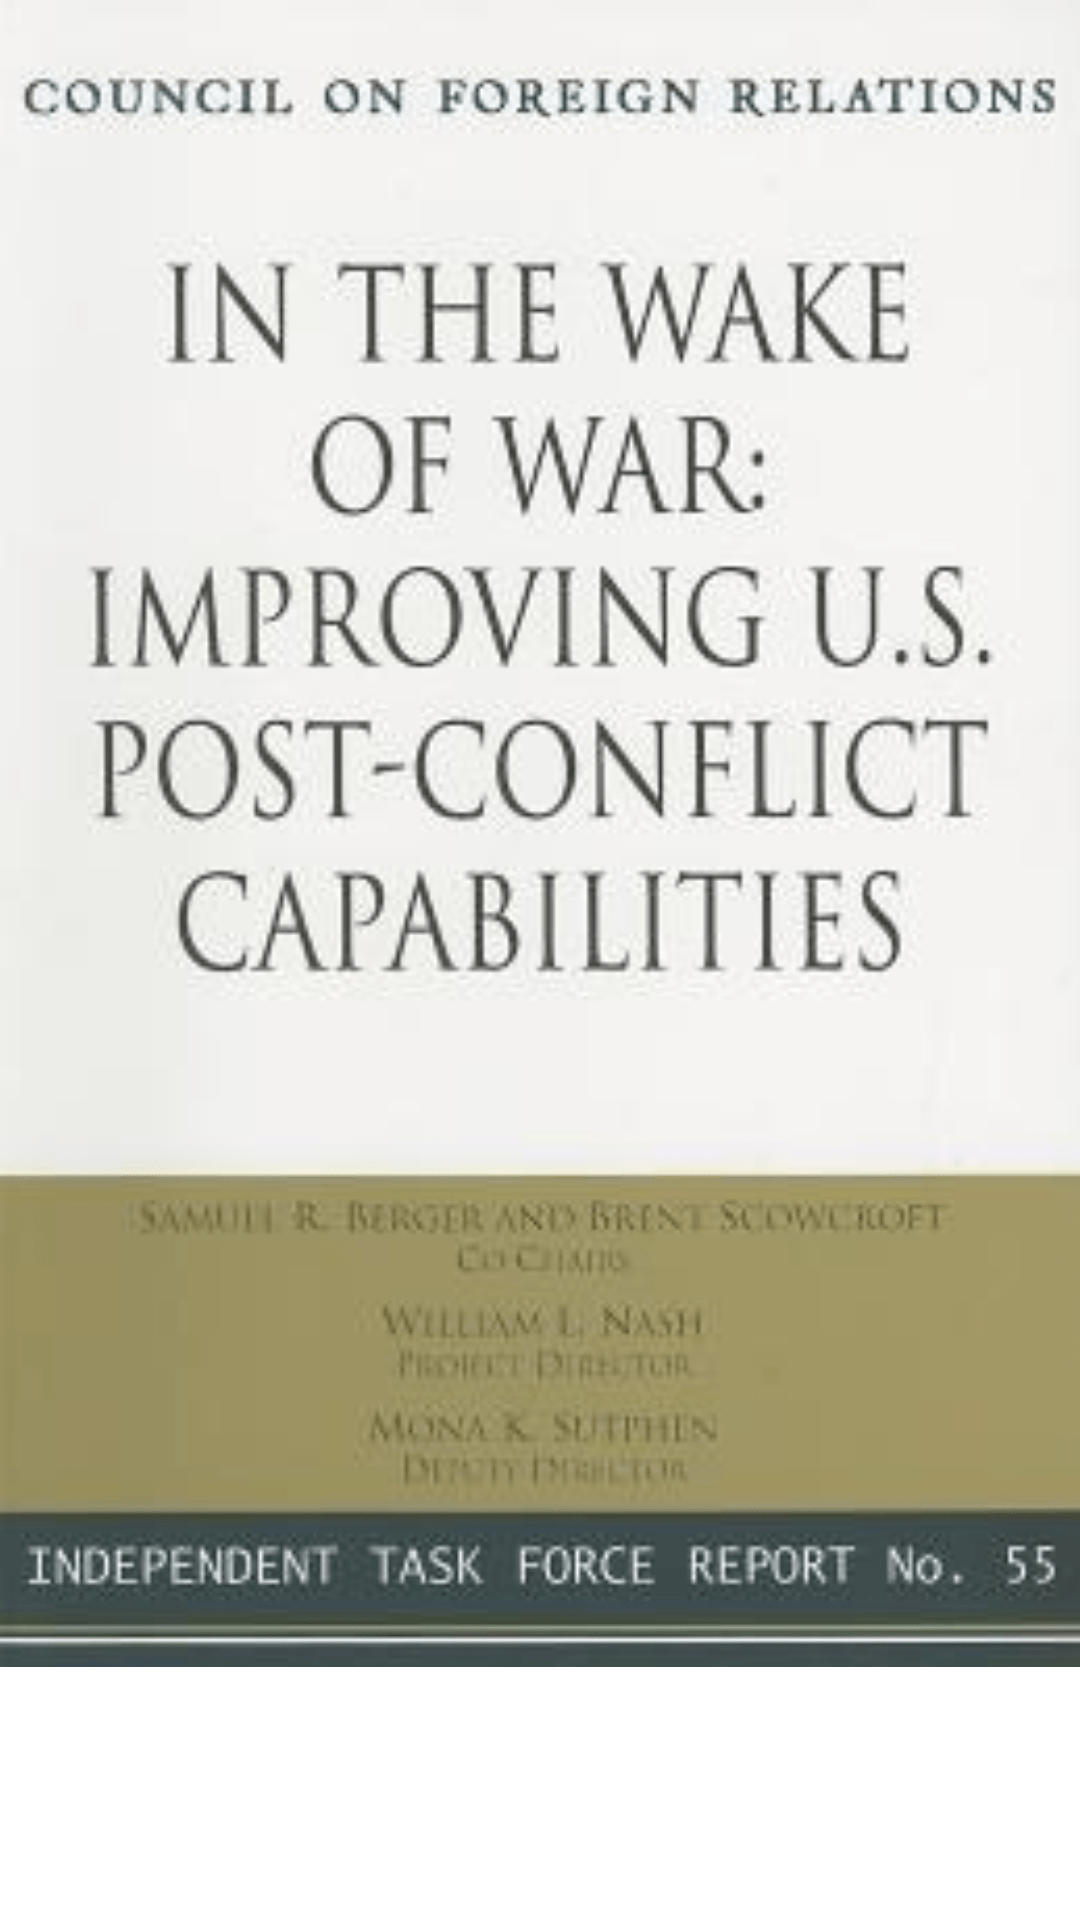 In the Wake of War: Improving U.S. Post-Conflict Capabilities: Report of an Independent Task Force